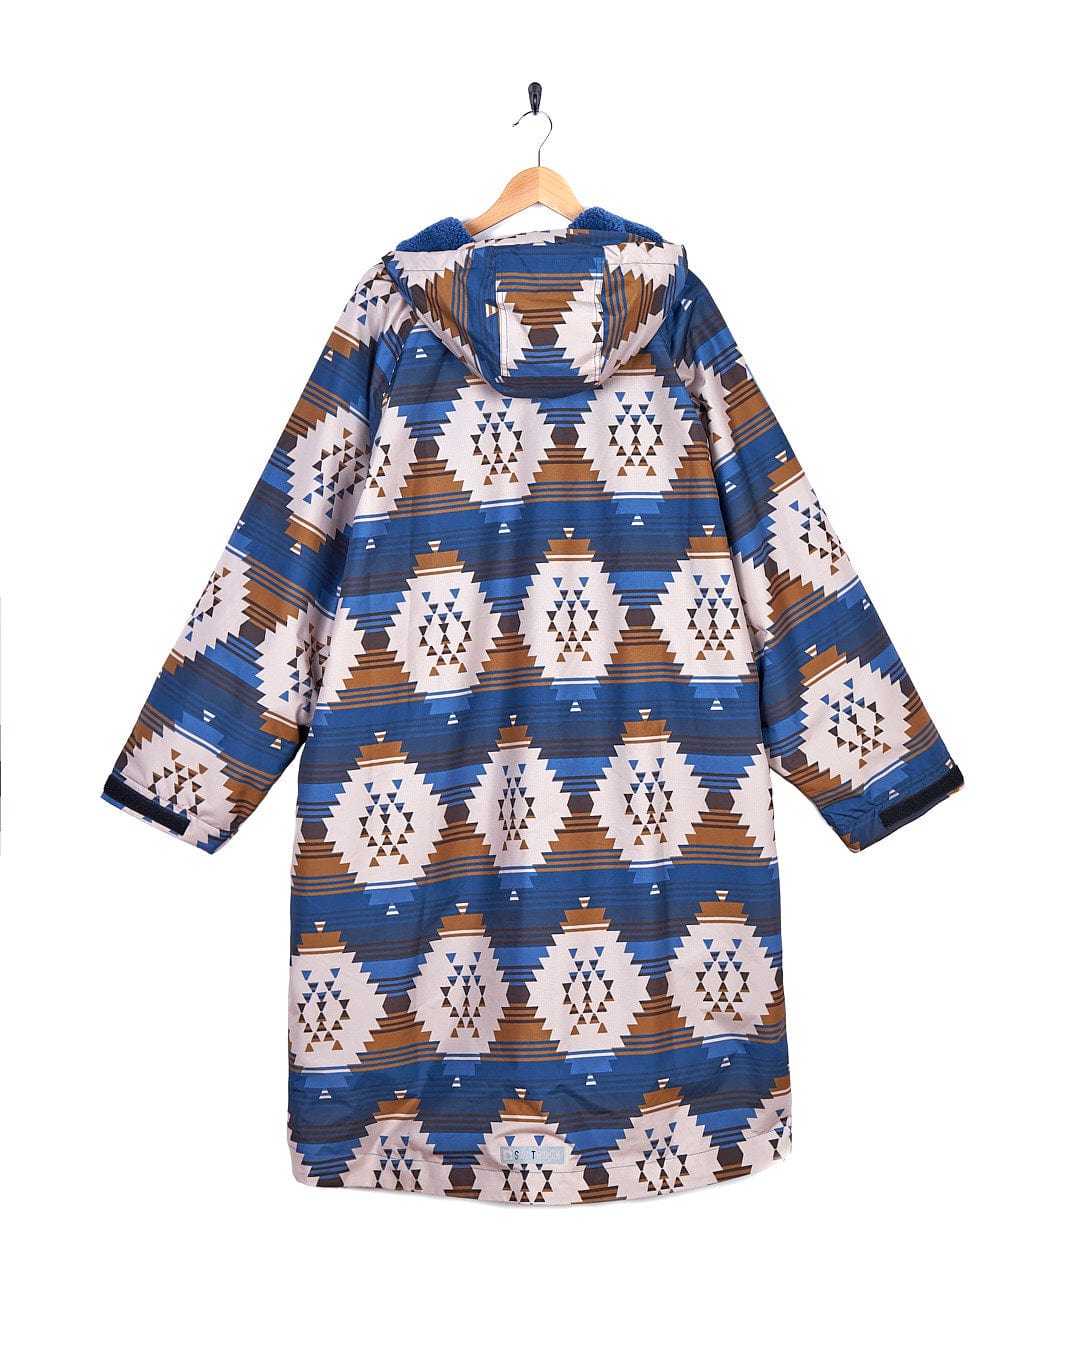 A blue and brown Four Seasons Changing Robe - Aztec coat hanging on a hanger, made by Saltrock.